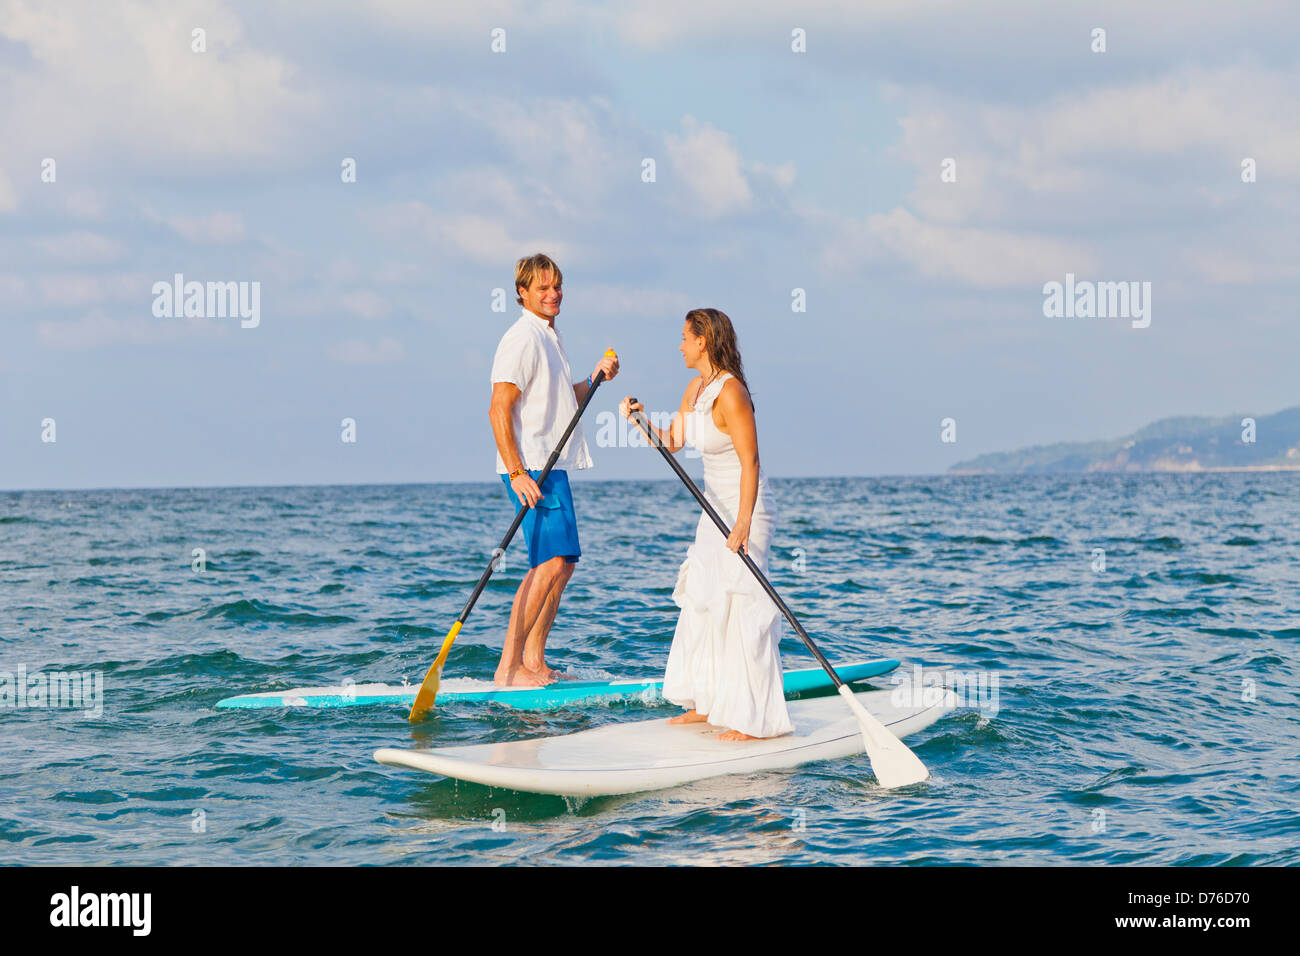 Dressed up man and woman riding paddle boards Stock Photo